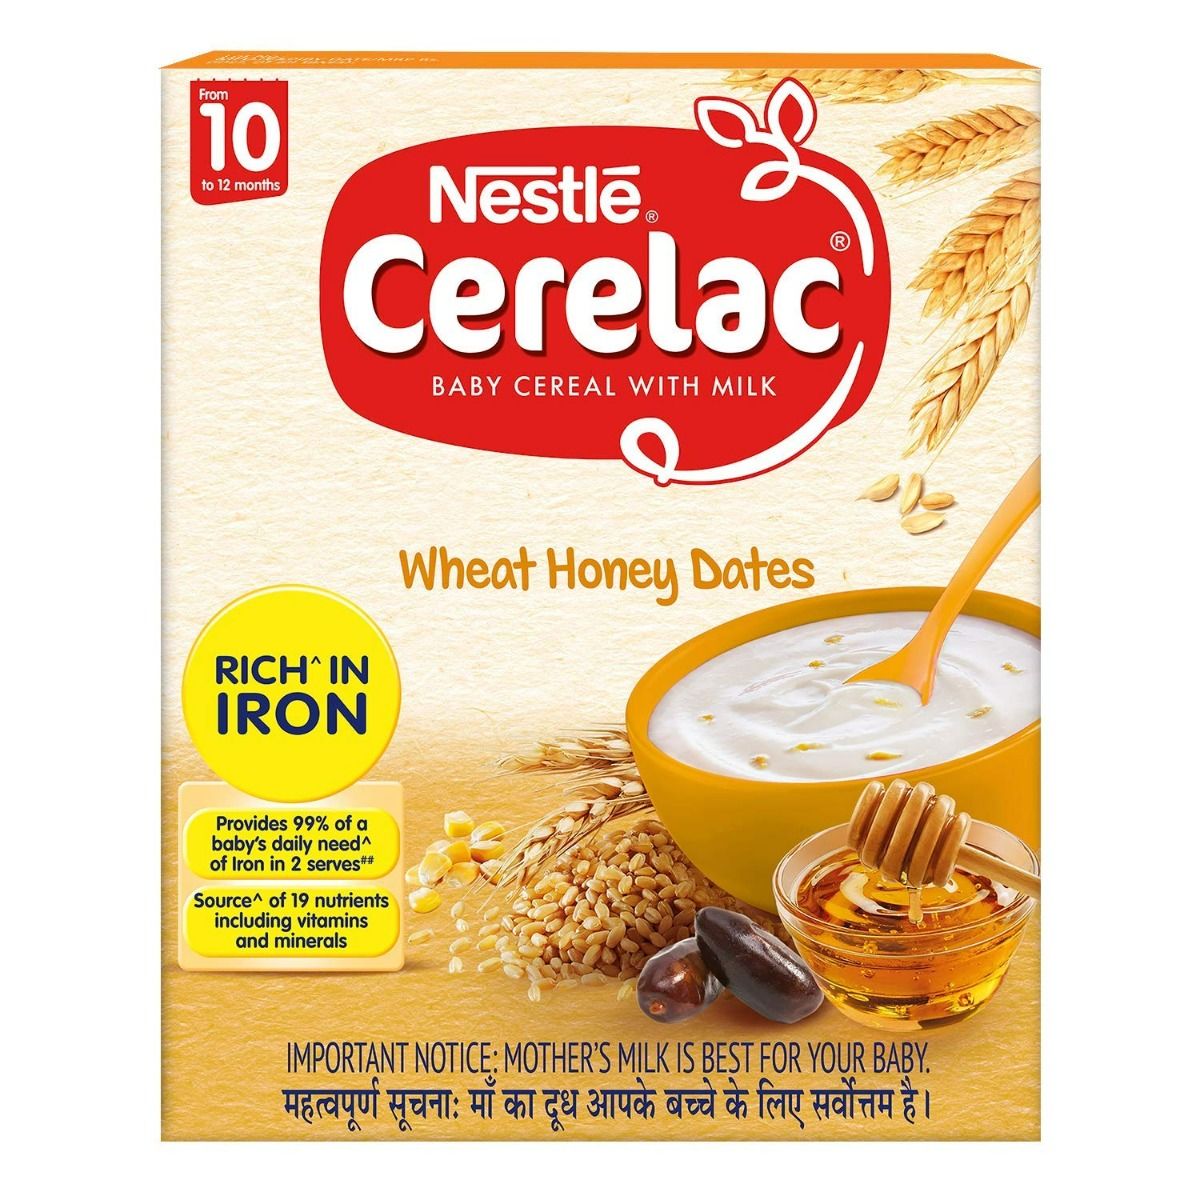 Nestle Cerelac Wheat Honey Dates Baby Cereal, 10 to 12 Months, 300 gm Refill Pack, Pack of 1 